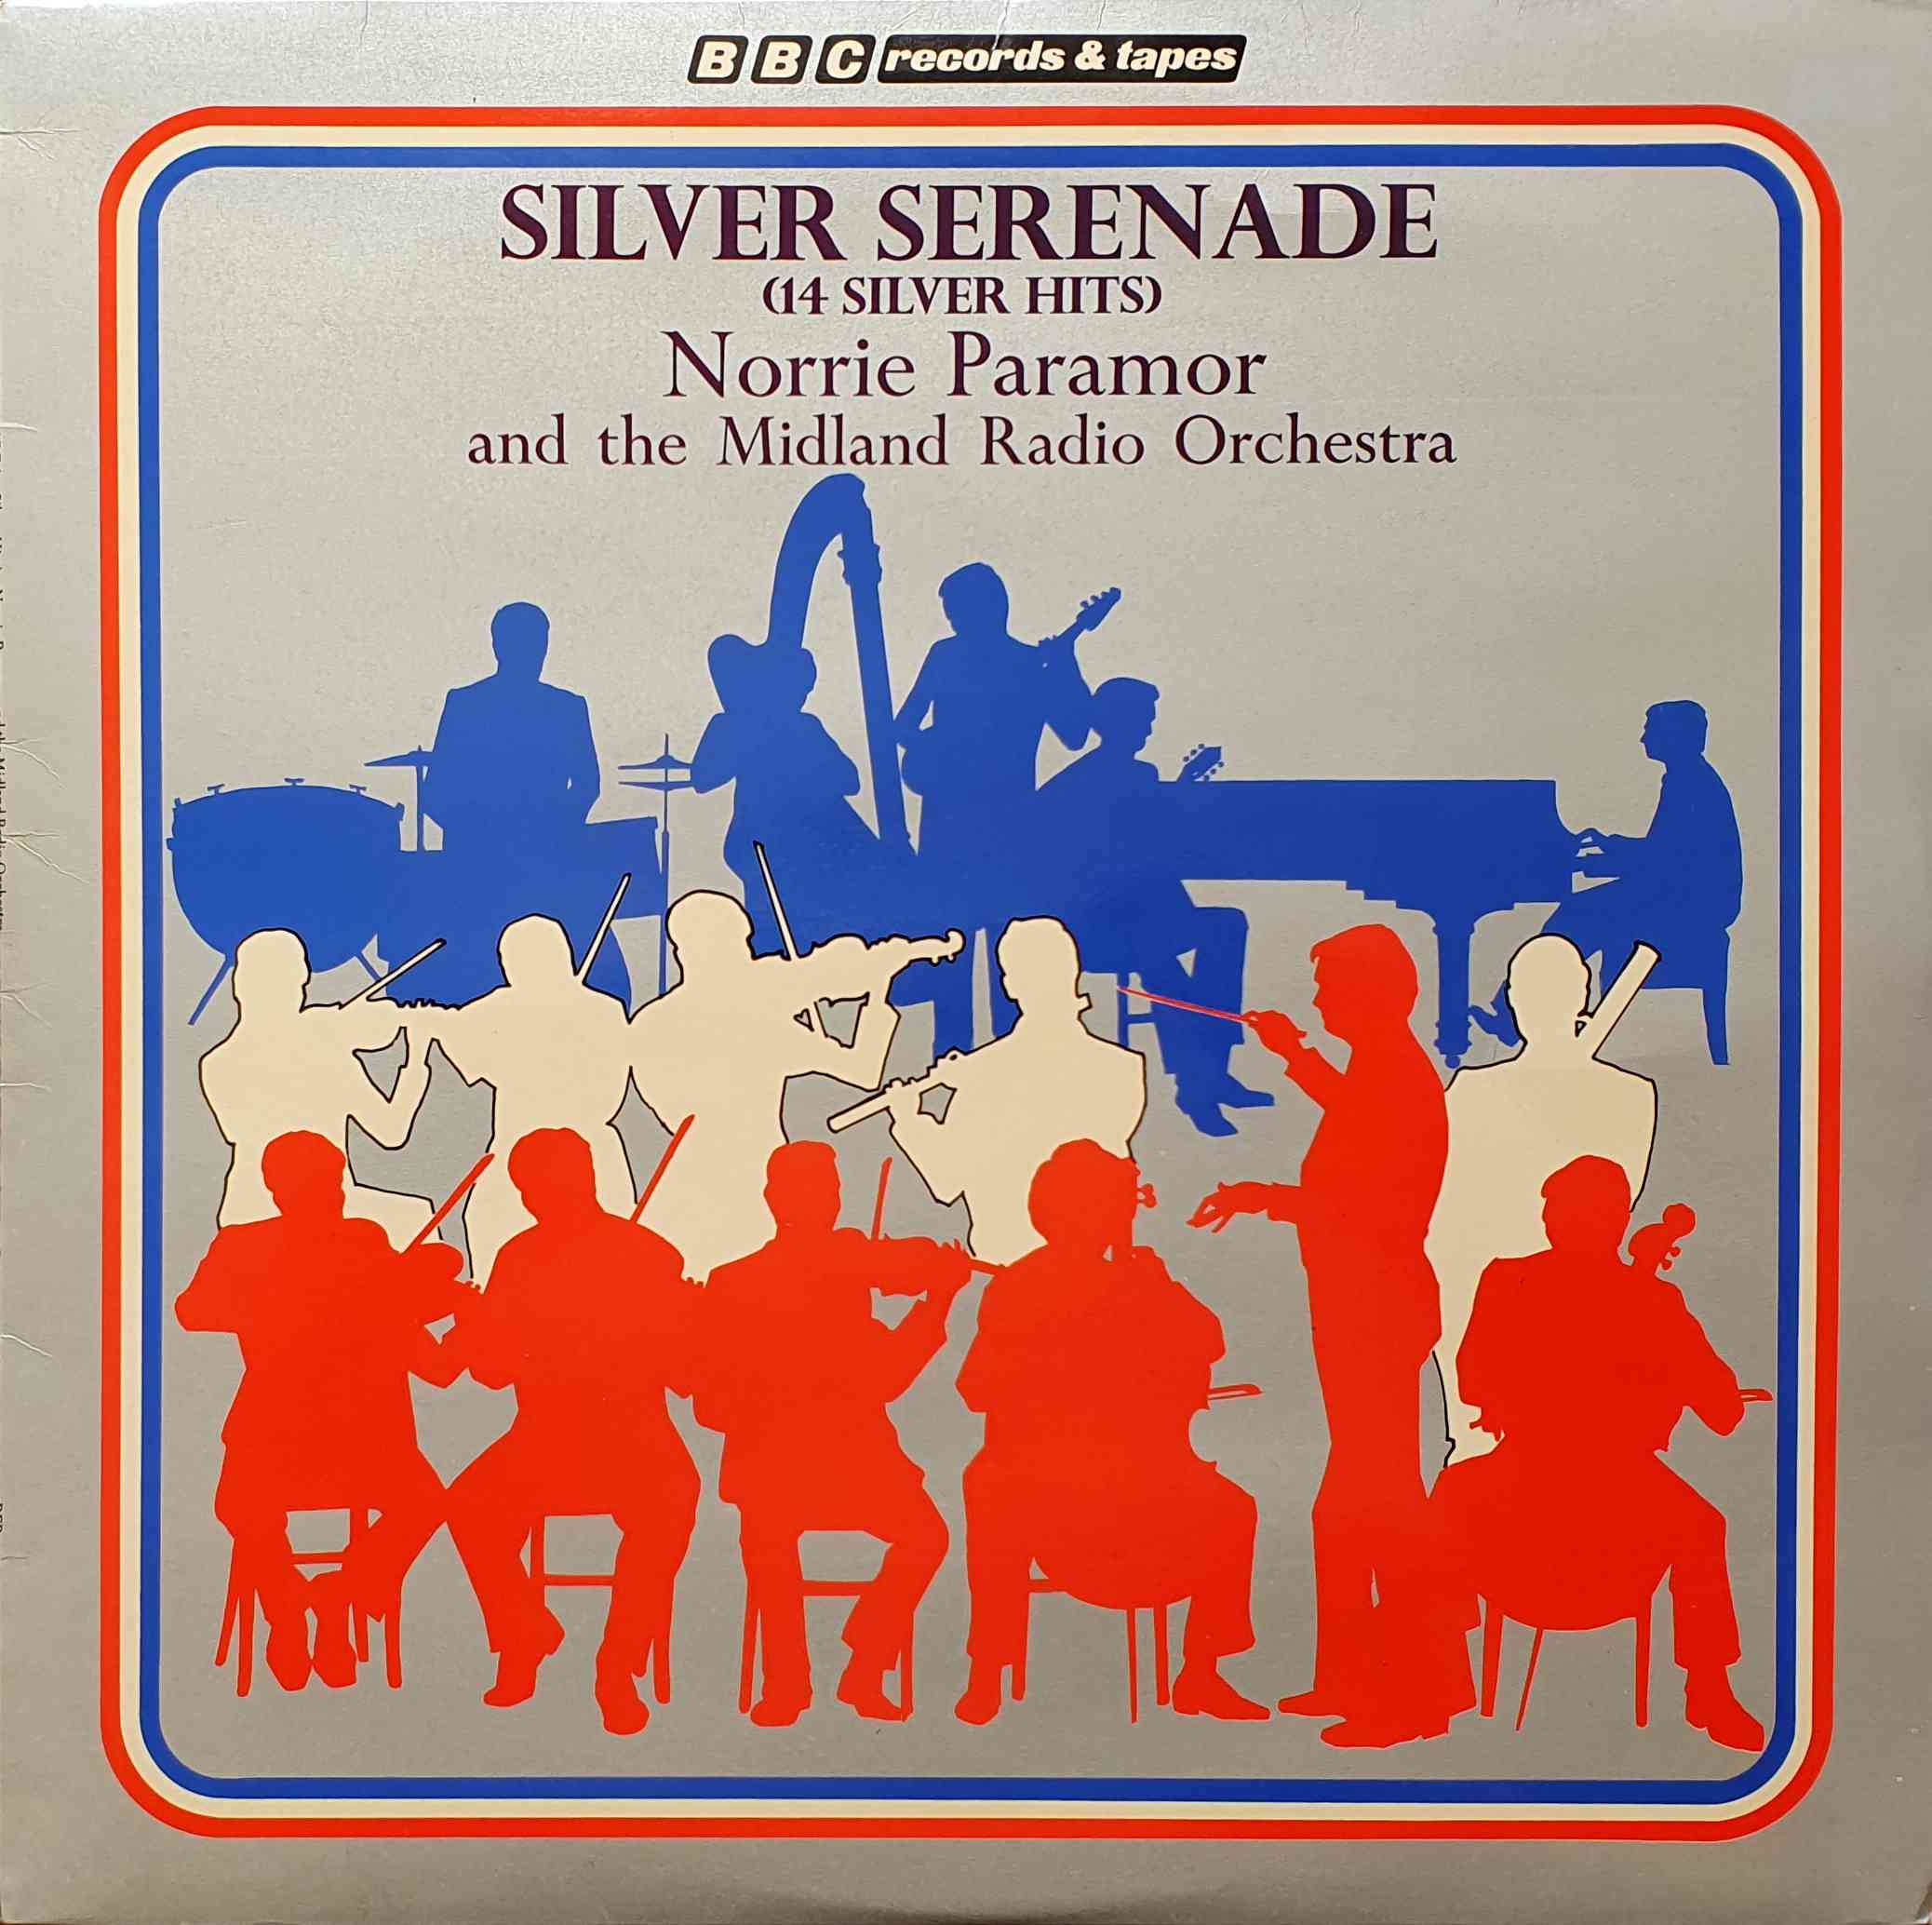 Picture of REB 272 The silver jubilee - Silver serenade by artist Norrie Paramor from the BBC albums - Records and Tapes library